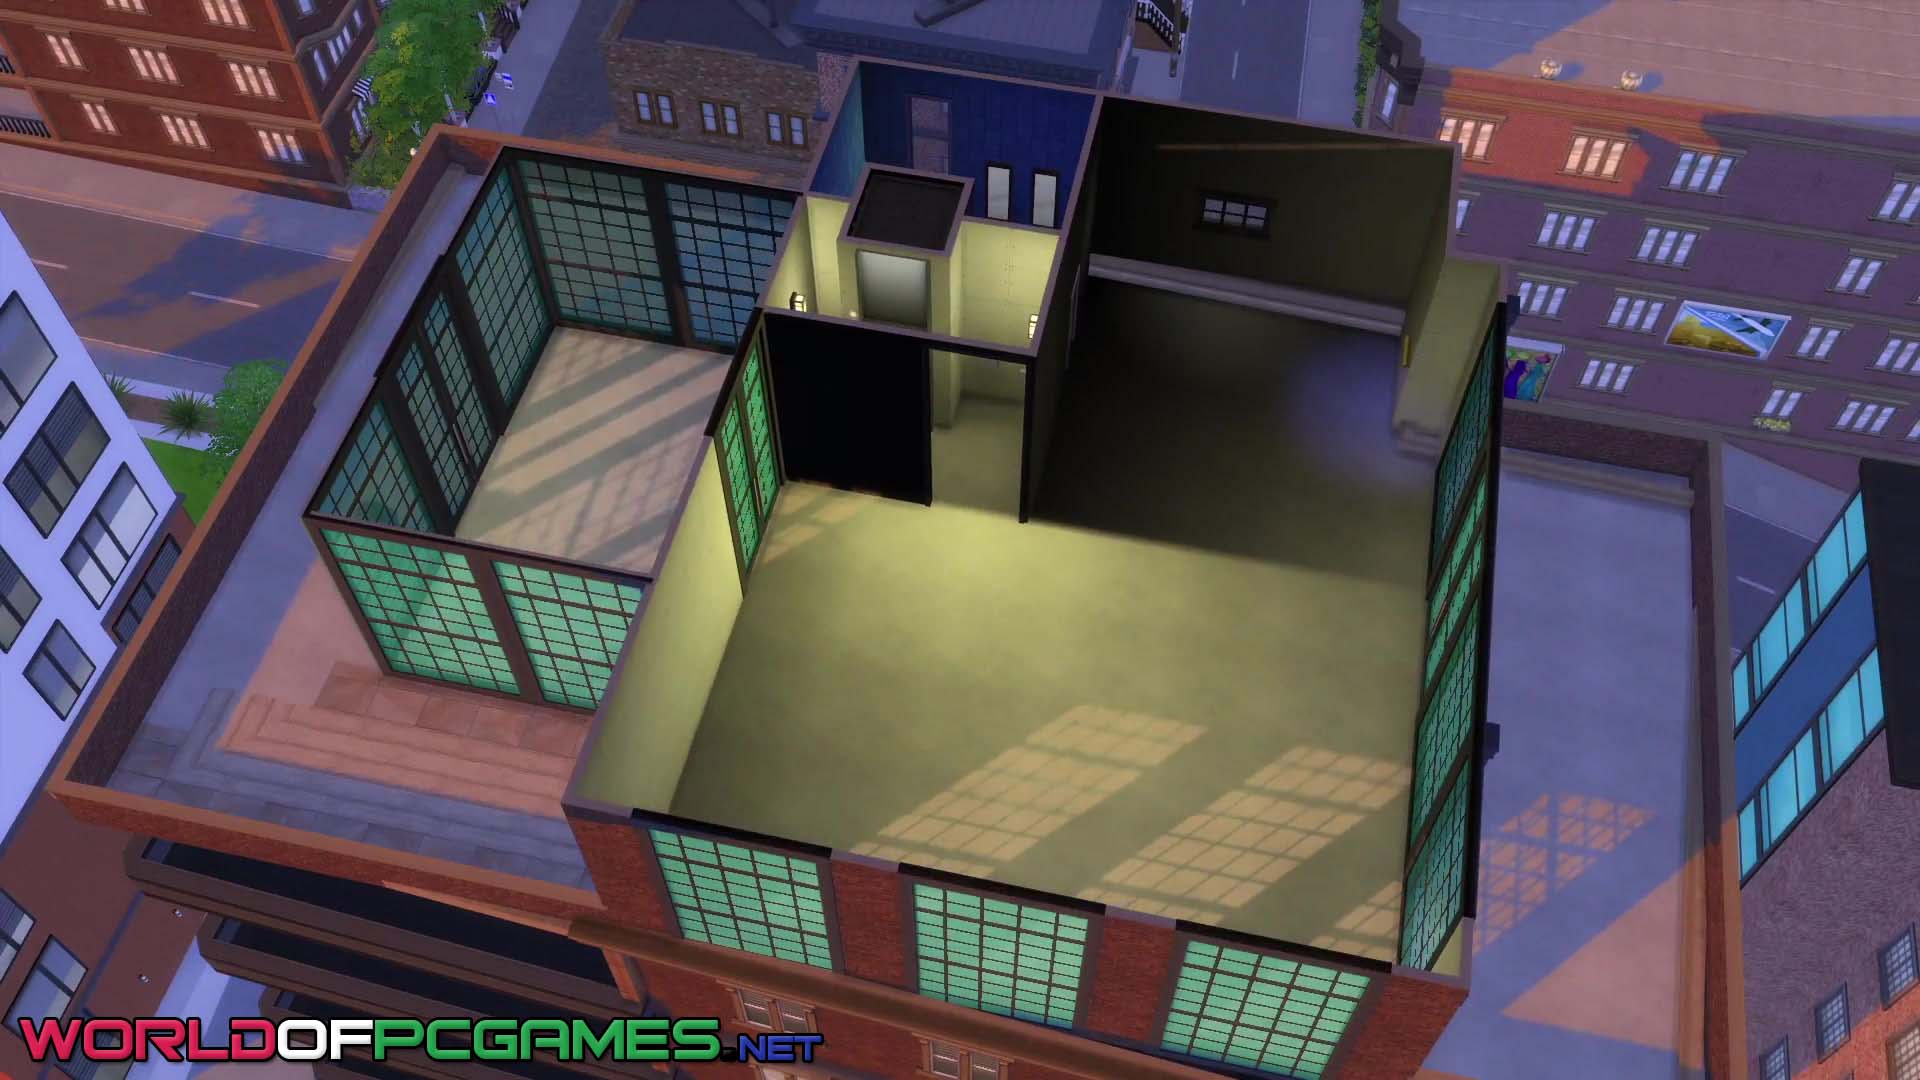 The SIMS 4 City Living Free Download By worldof-pcgames.net